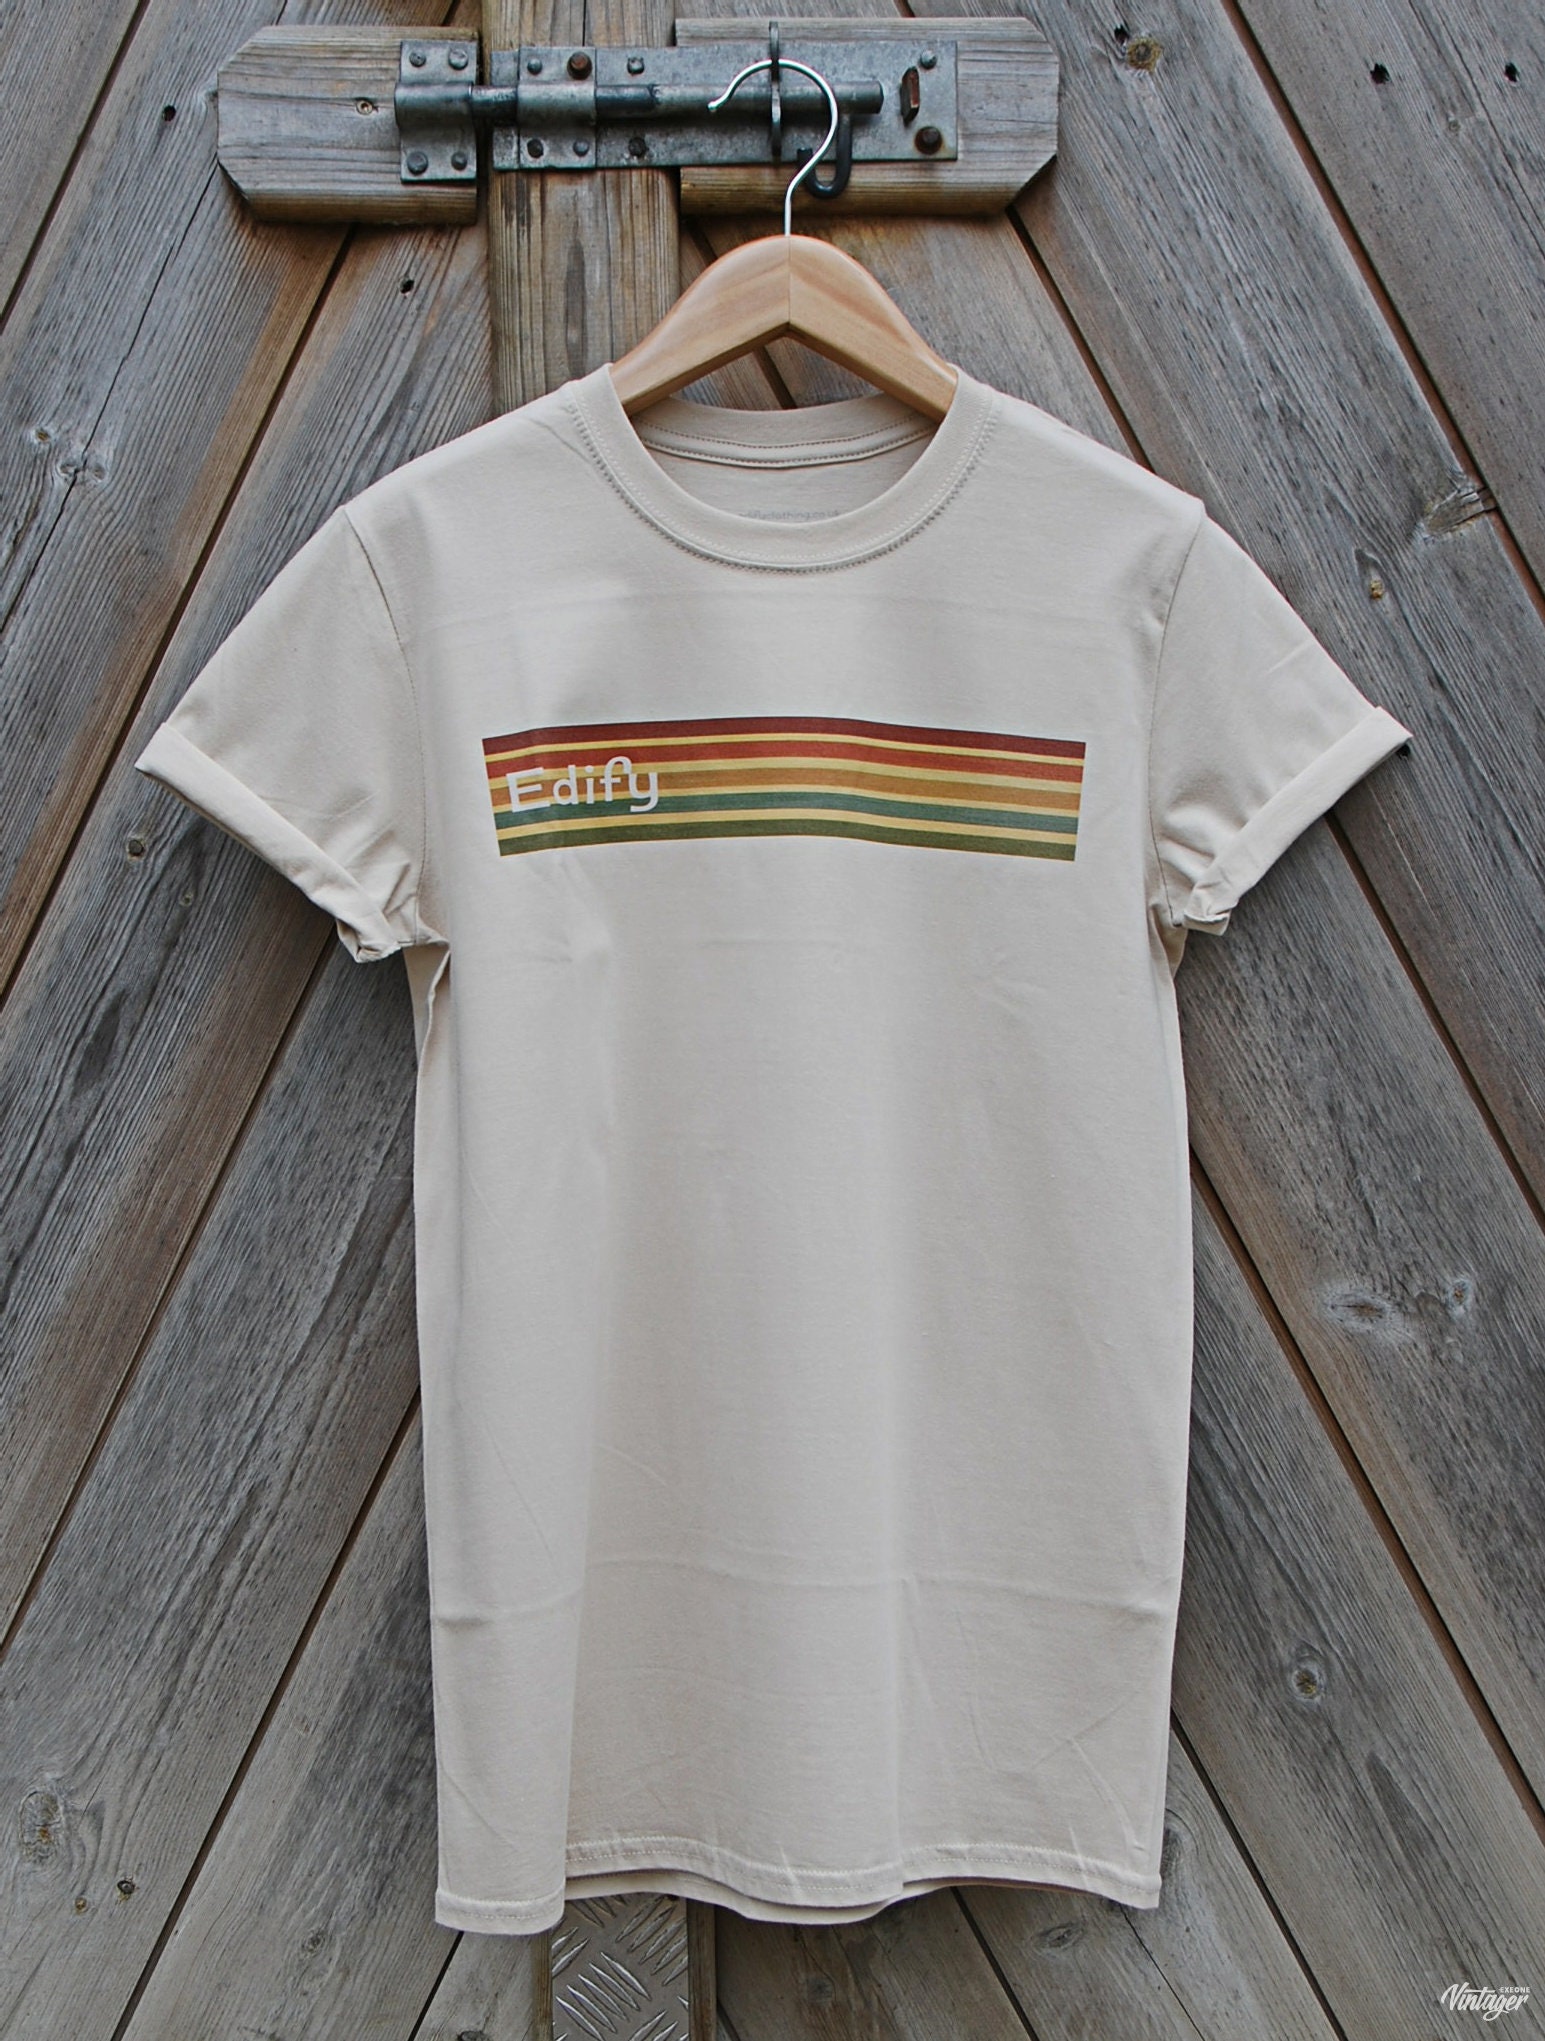 70s Retro Striped T Shirt From Edify Clothing Available in a - Etsy